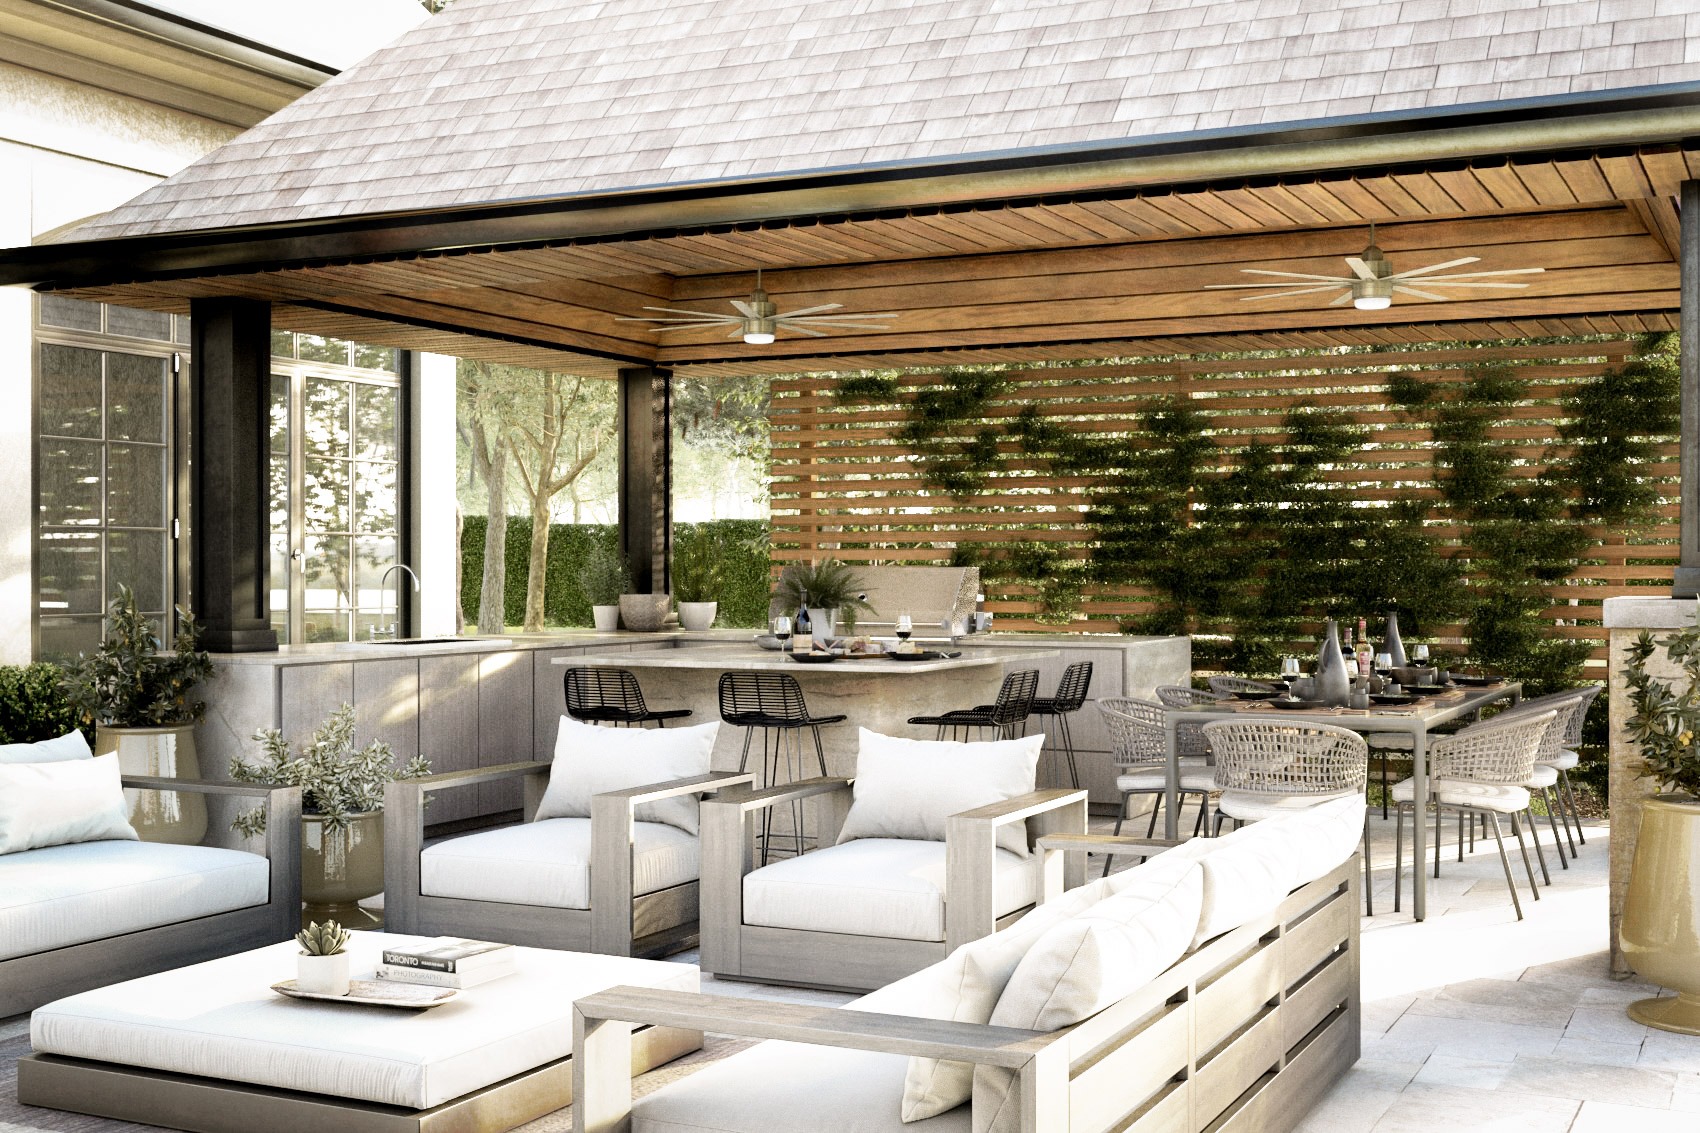 outdoor furniture for seating, entertaining and dining under a custom pergola with an outdoor kitchen and bar